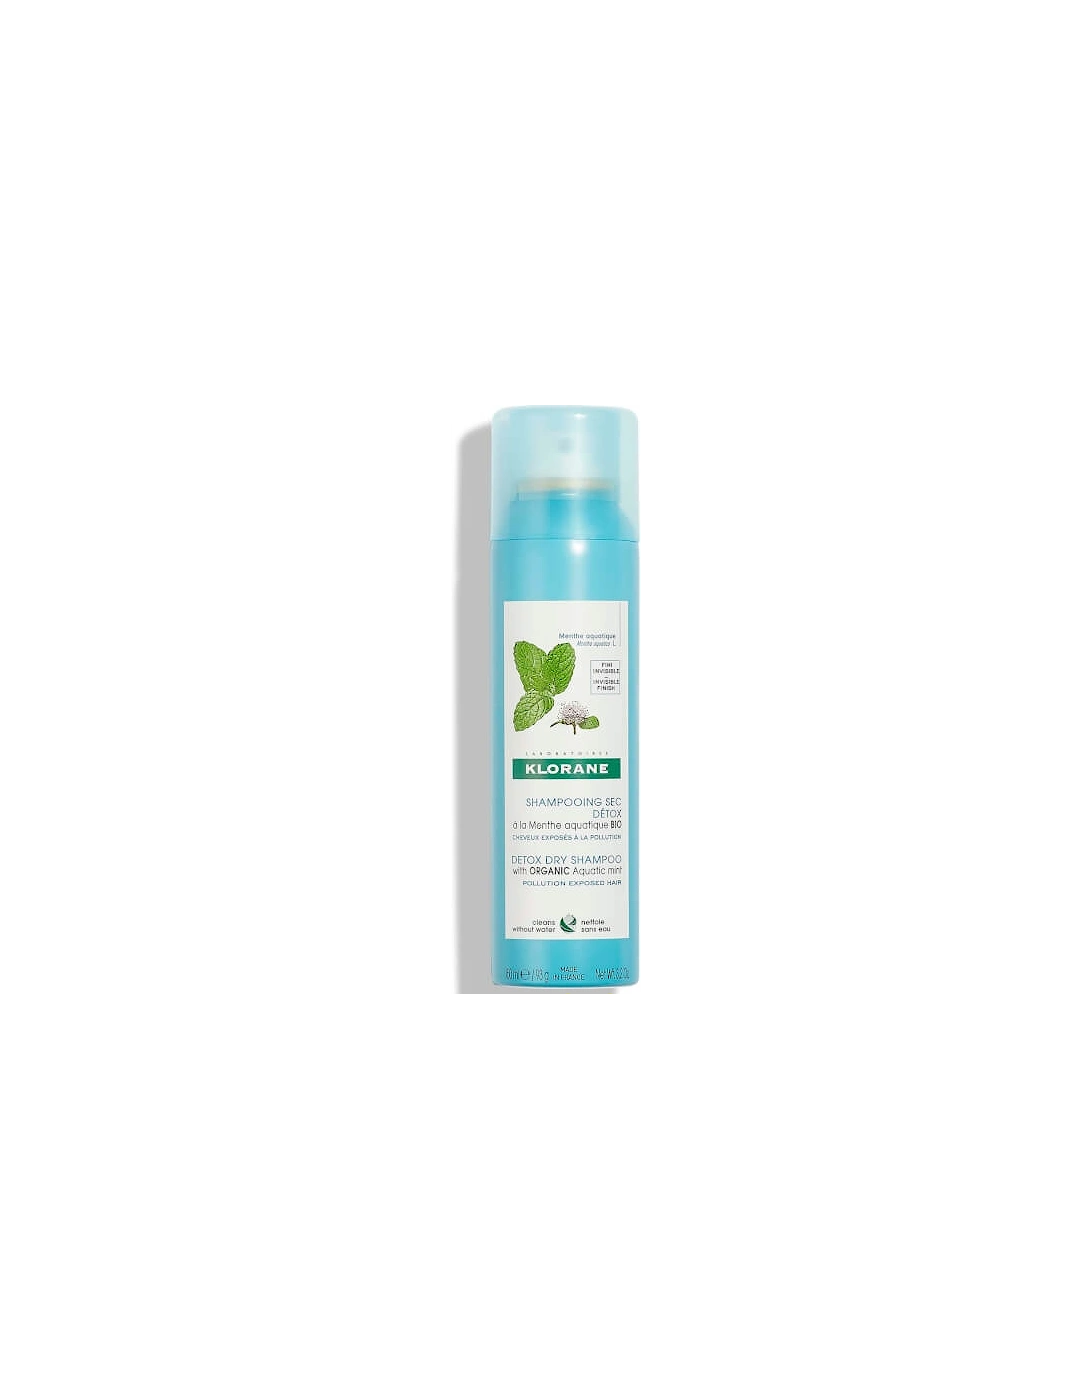 Detox Dry Shampoo with Organic Aquatic Mint for Pollution-Exposed Hair 150ml - KLORANE, 2 of 1